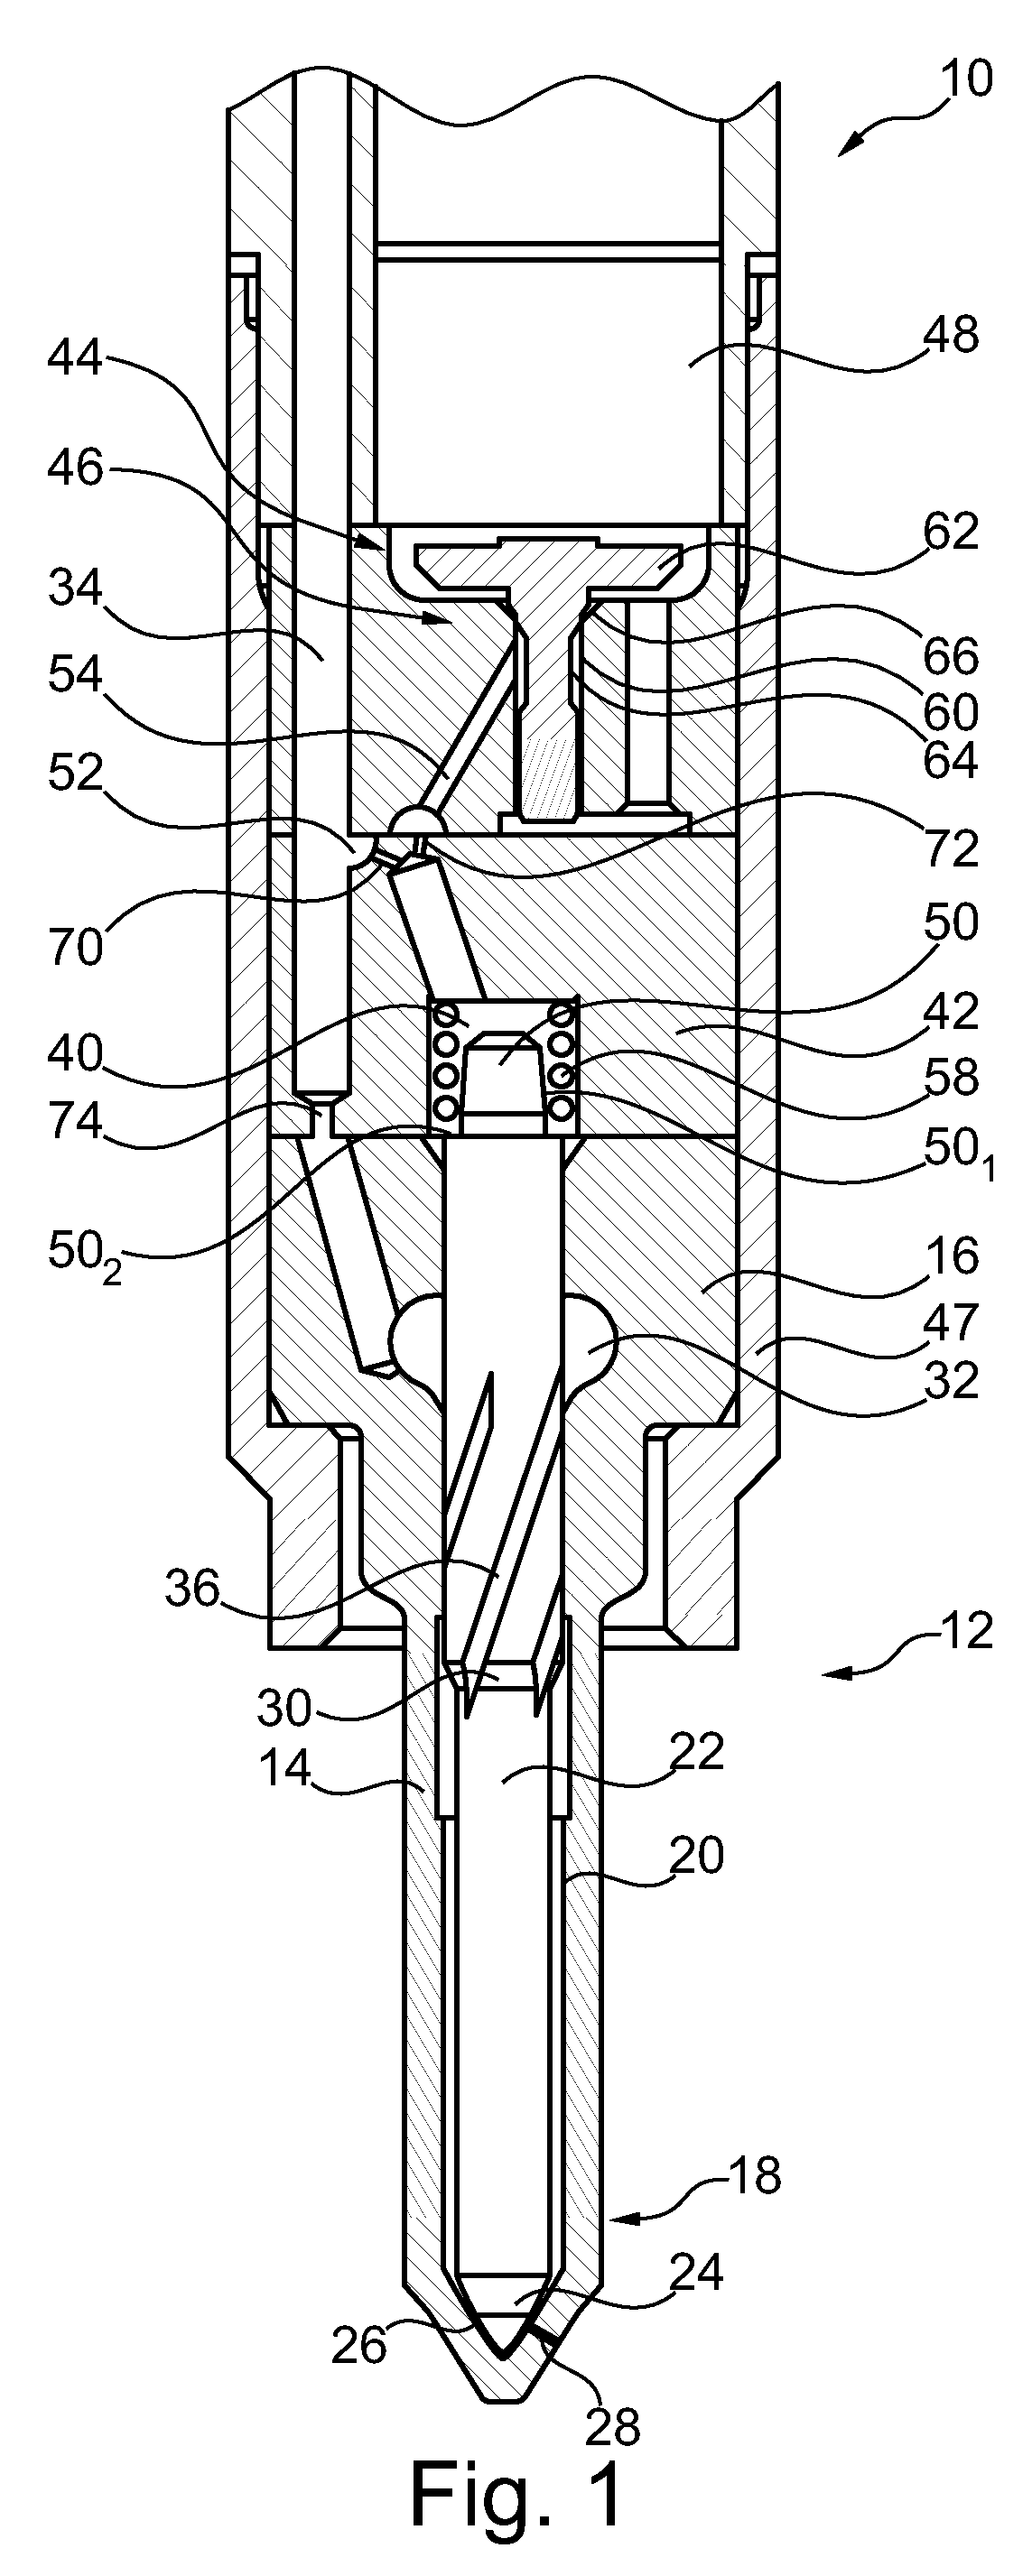 Fuel Injector for an Internal Combustion Engine